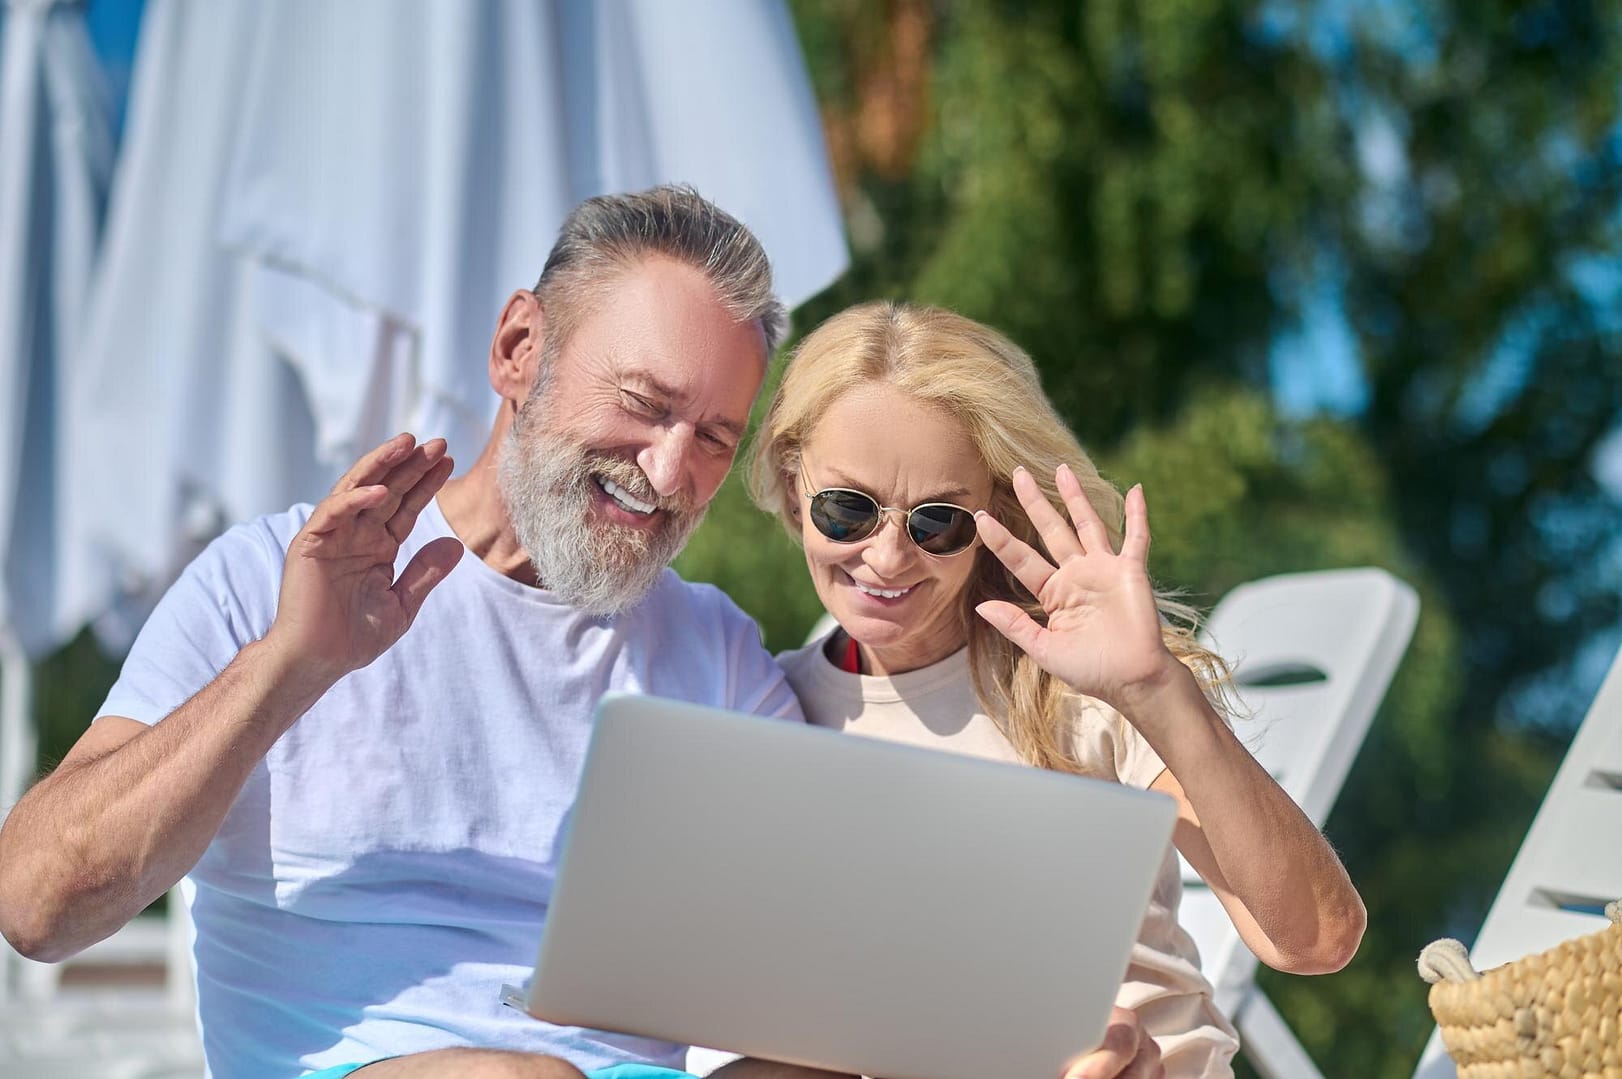 Mature couple having a video call and waving their hands smiling on beach chairs